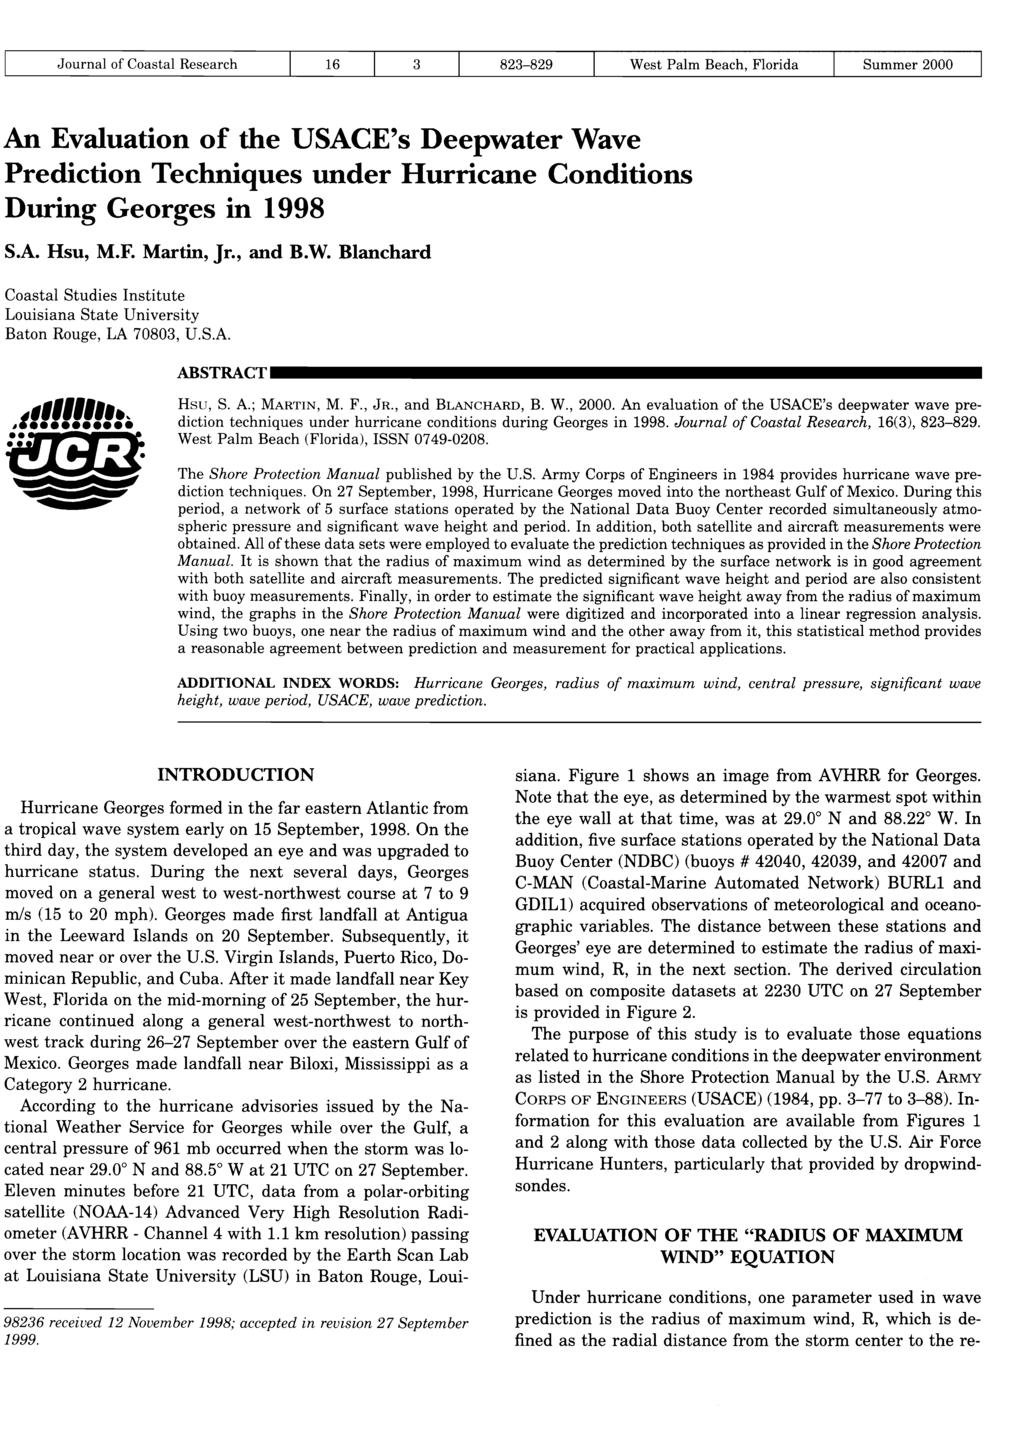 Journal of Coastal Research 823-829 West Palm Beach, Florida Summer 2000 An Evaluation of the USACE's Deepwater Wave Prediction Techniques under Hurricane Conditions During Georges in 1998 S.A. Hsu, M.